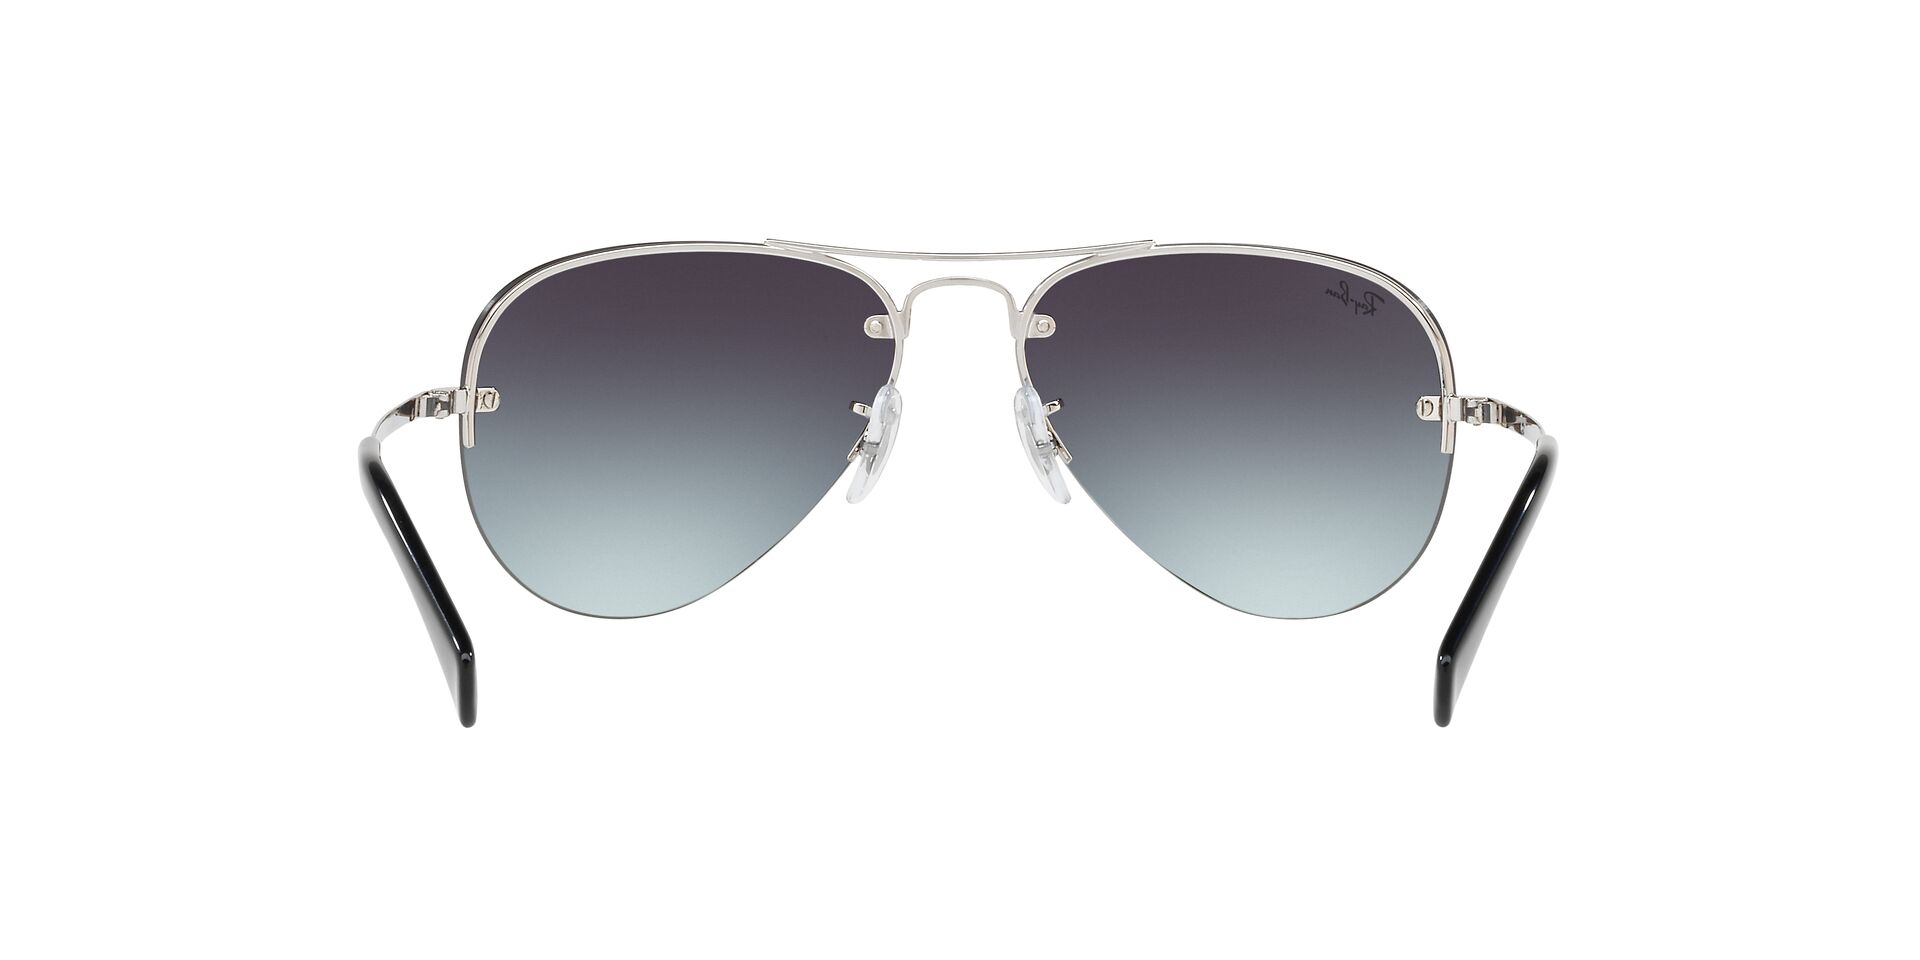 Buy Ray-Ban Rb3449 Sunglasses Online.